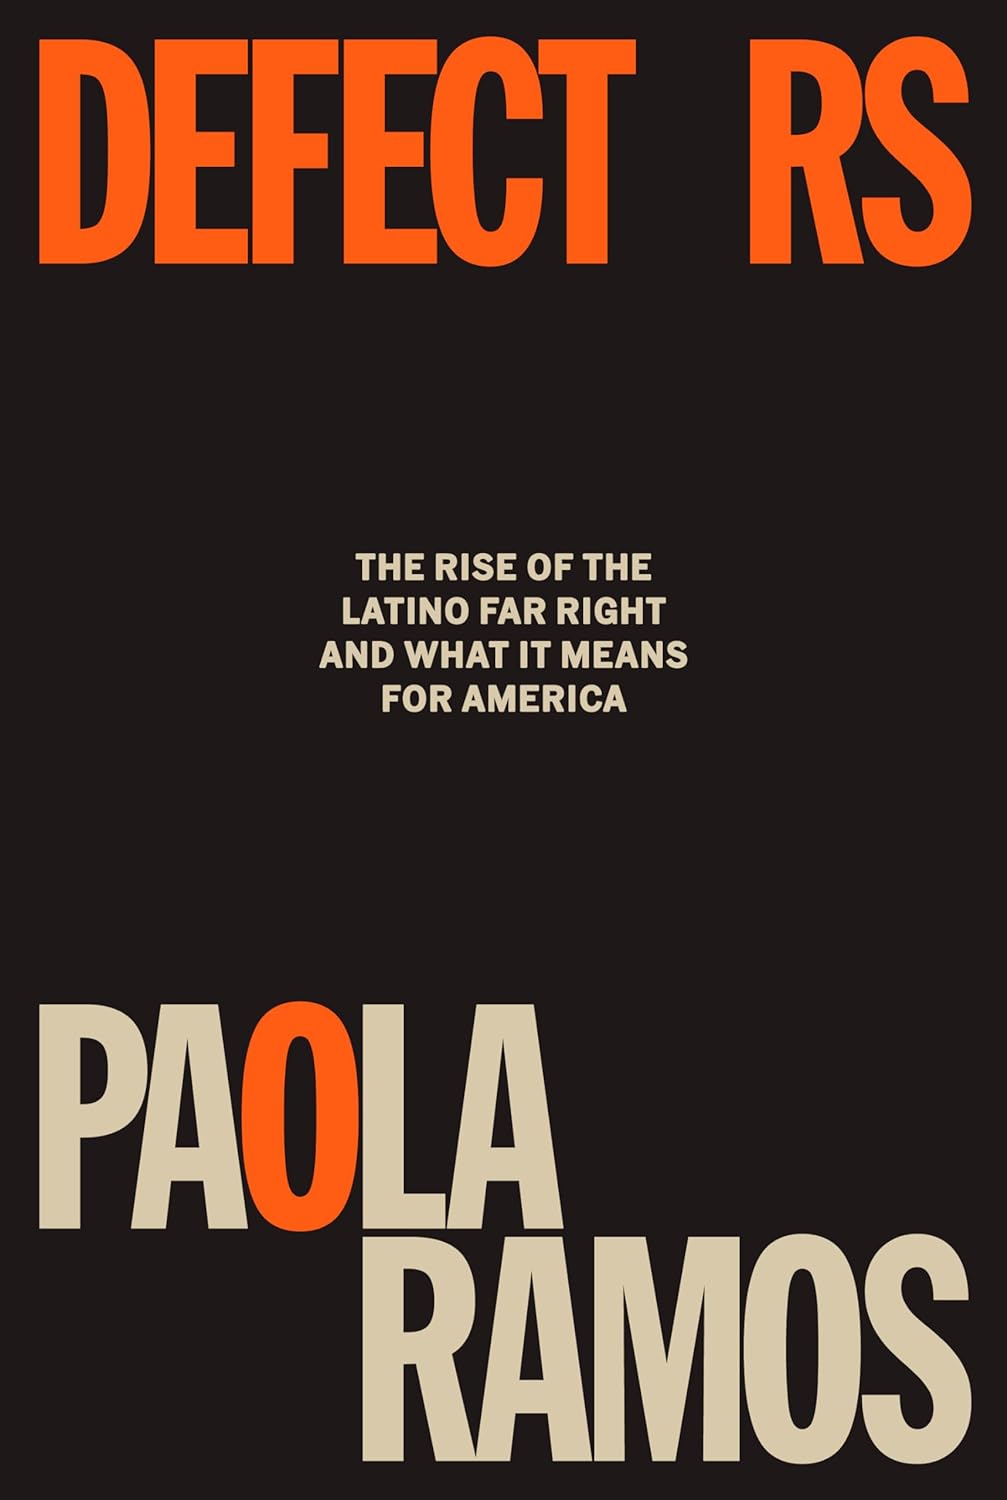 Defectors: The Rise of the Latino Far Right and What It Means for America